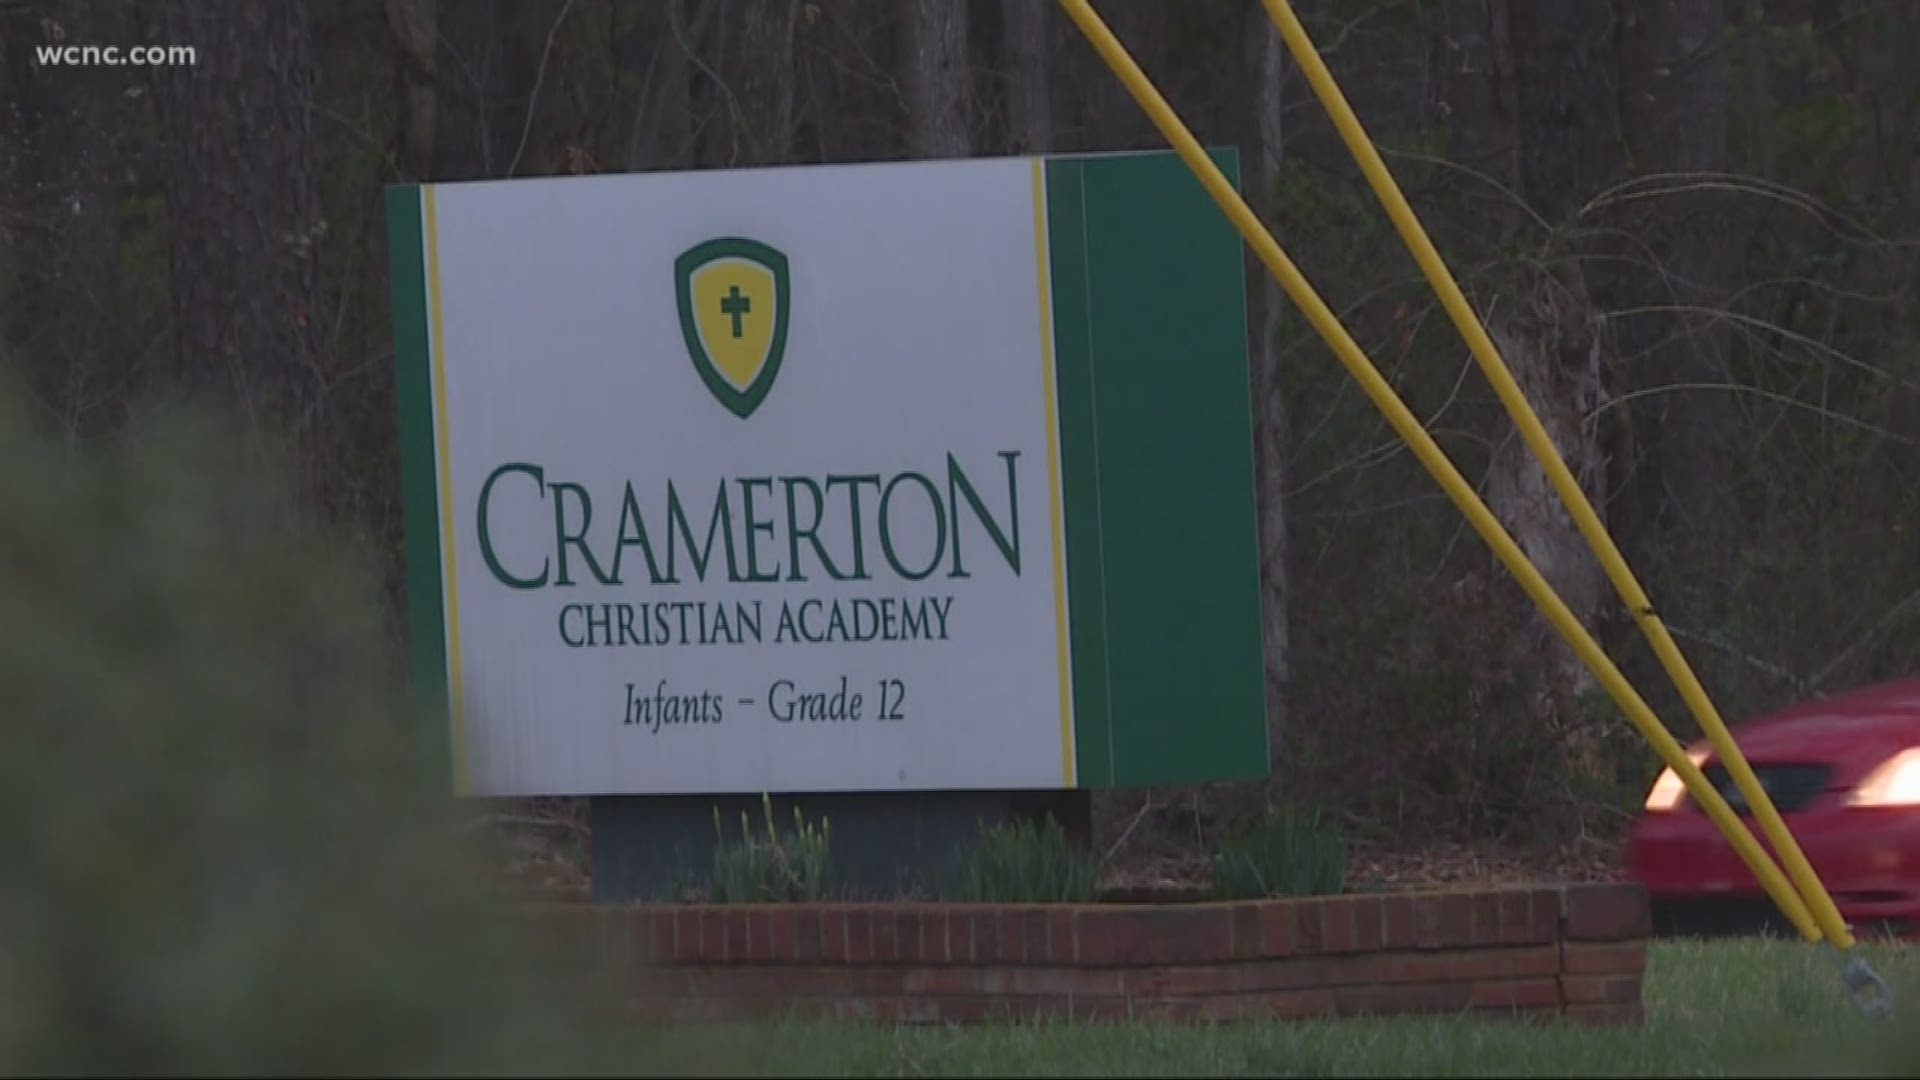 Leaders at Cramerton Christian Academy choose to close its doors for a few days for the sake of health and student wellbeing.